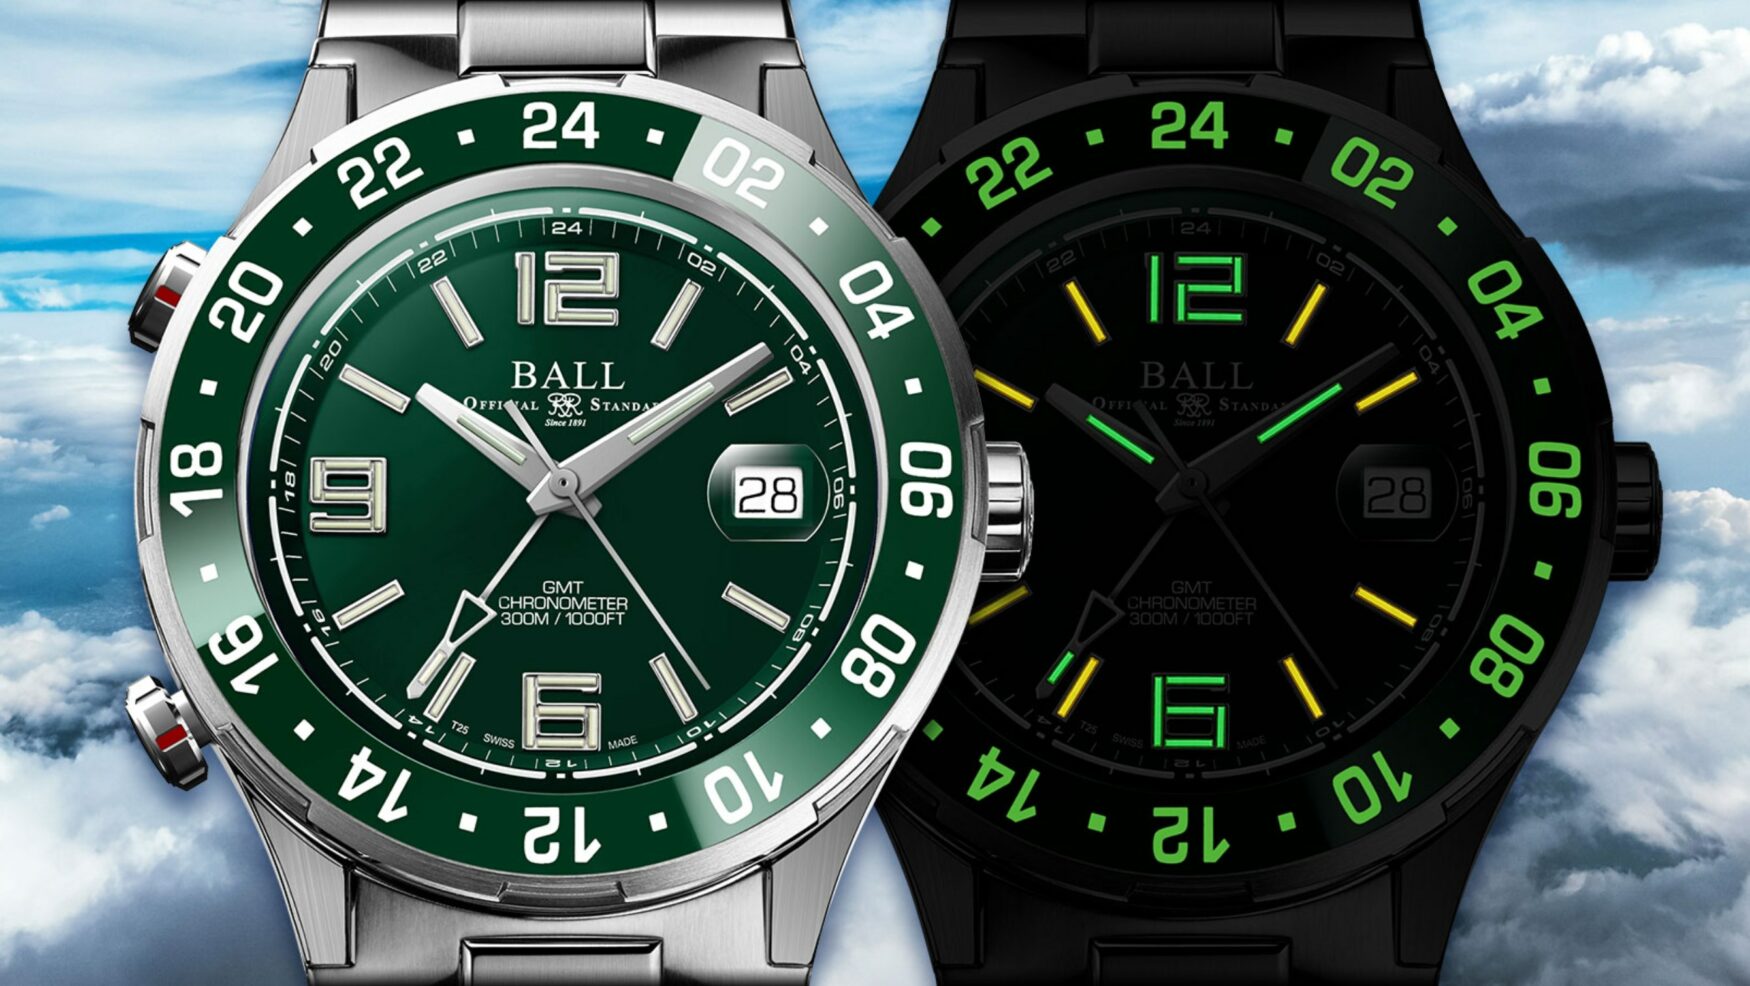 The Ball Engineer Roadmaster Pilot GMT Green offers a unique take on a true GMT